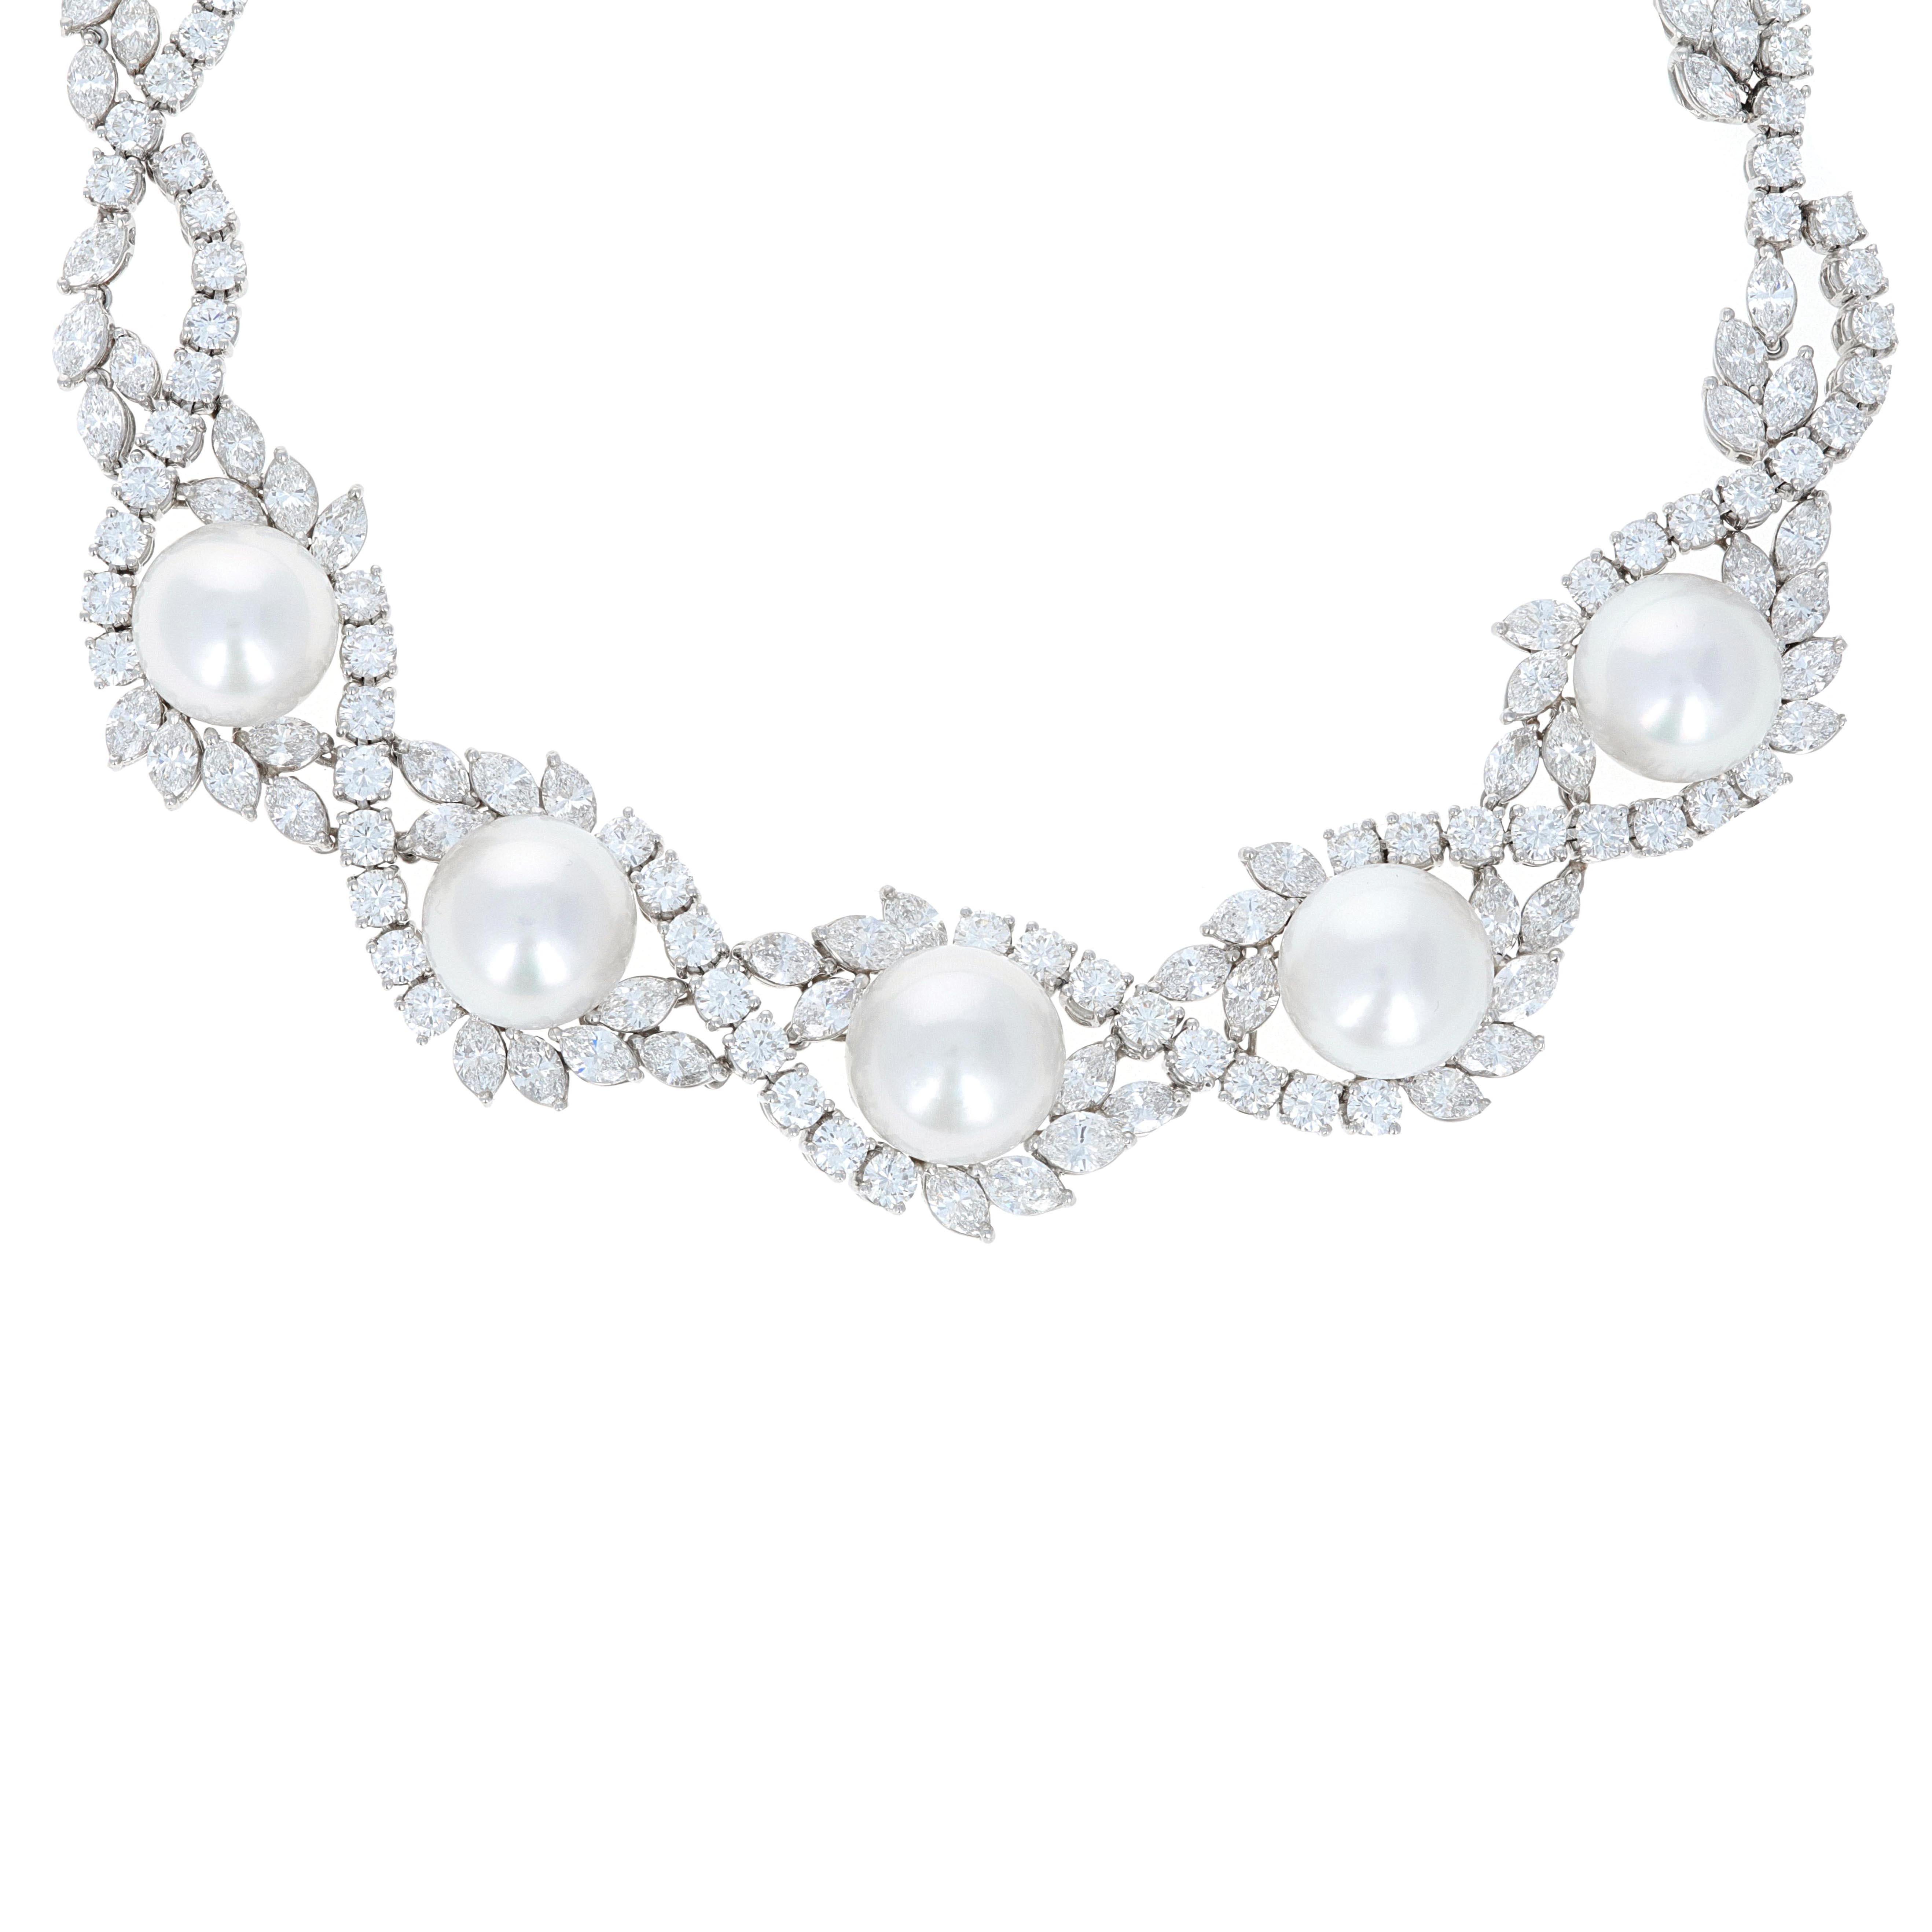 Modern 54.25 Carat Total Weight Diamond and Pearl Necklace, Earring and Ring Set